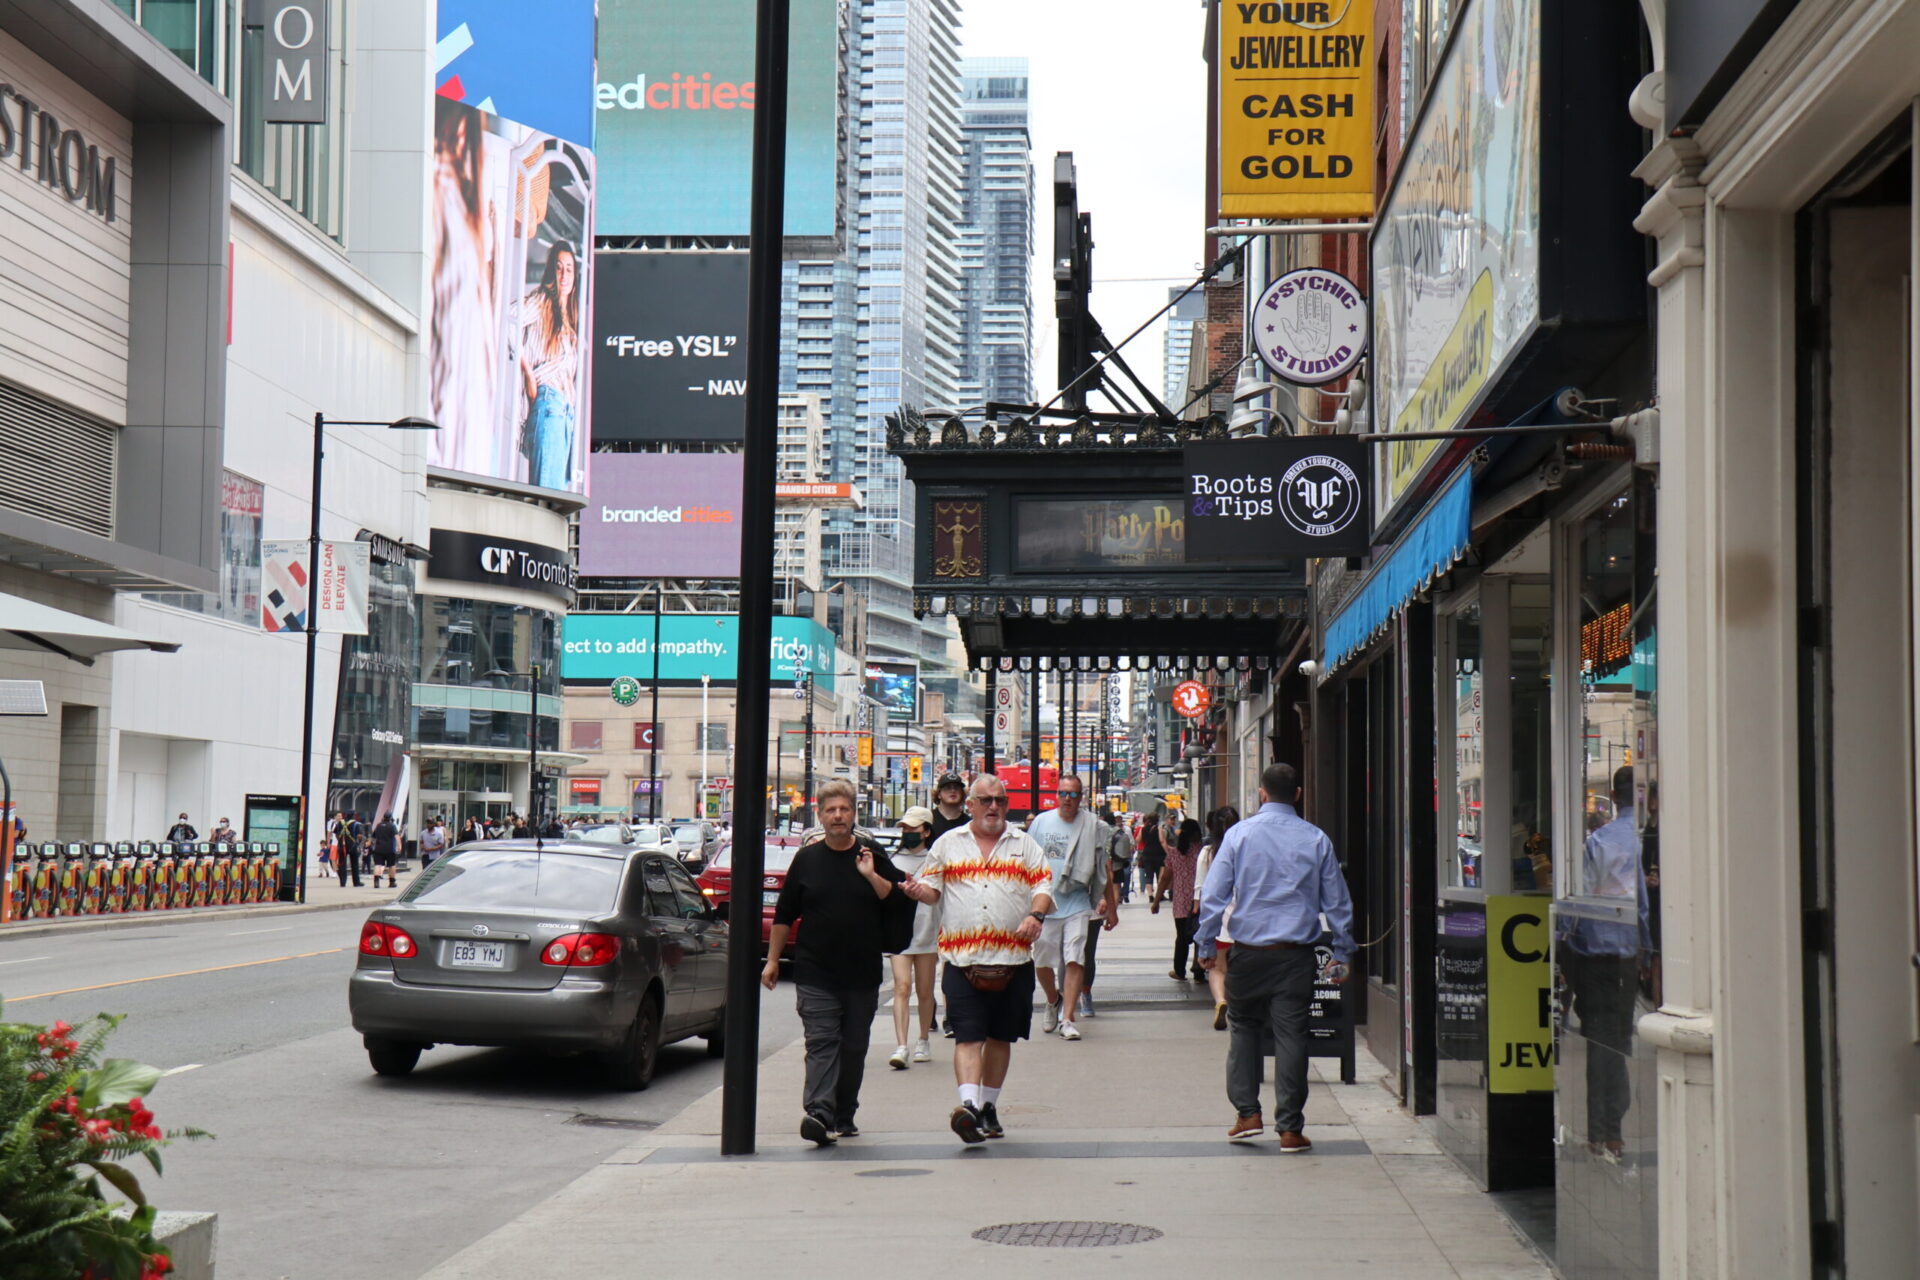 Yonge Street Looking North, Taken from South of Dundas. Pedestrians on sidewalk and cars on road.